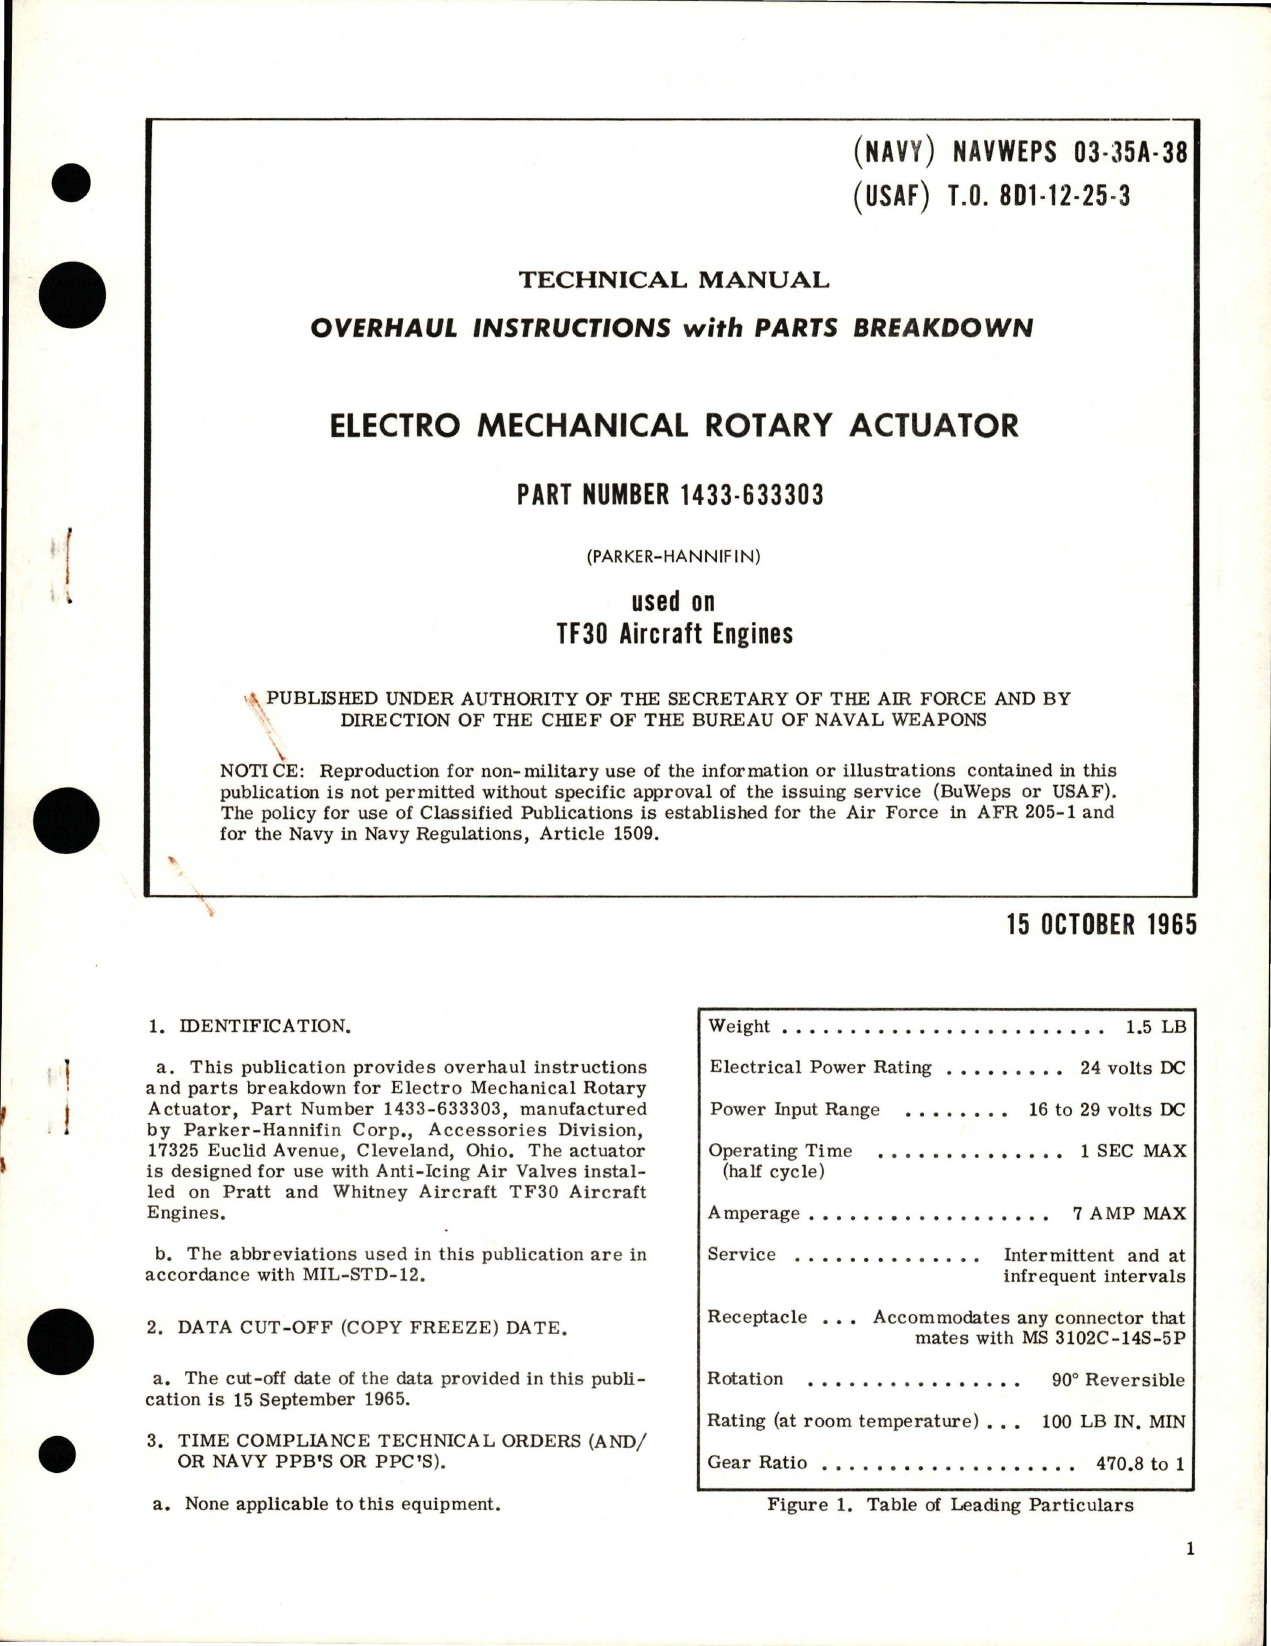 Sample page 1 from AirCorps Library document: Overhaul Instructions with Parts Breakdown for Electro Mechanical Rotary Actuator - Part 1433-633303